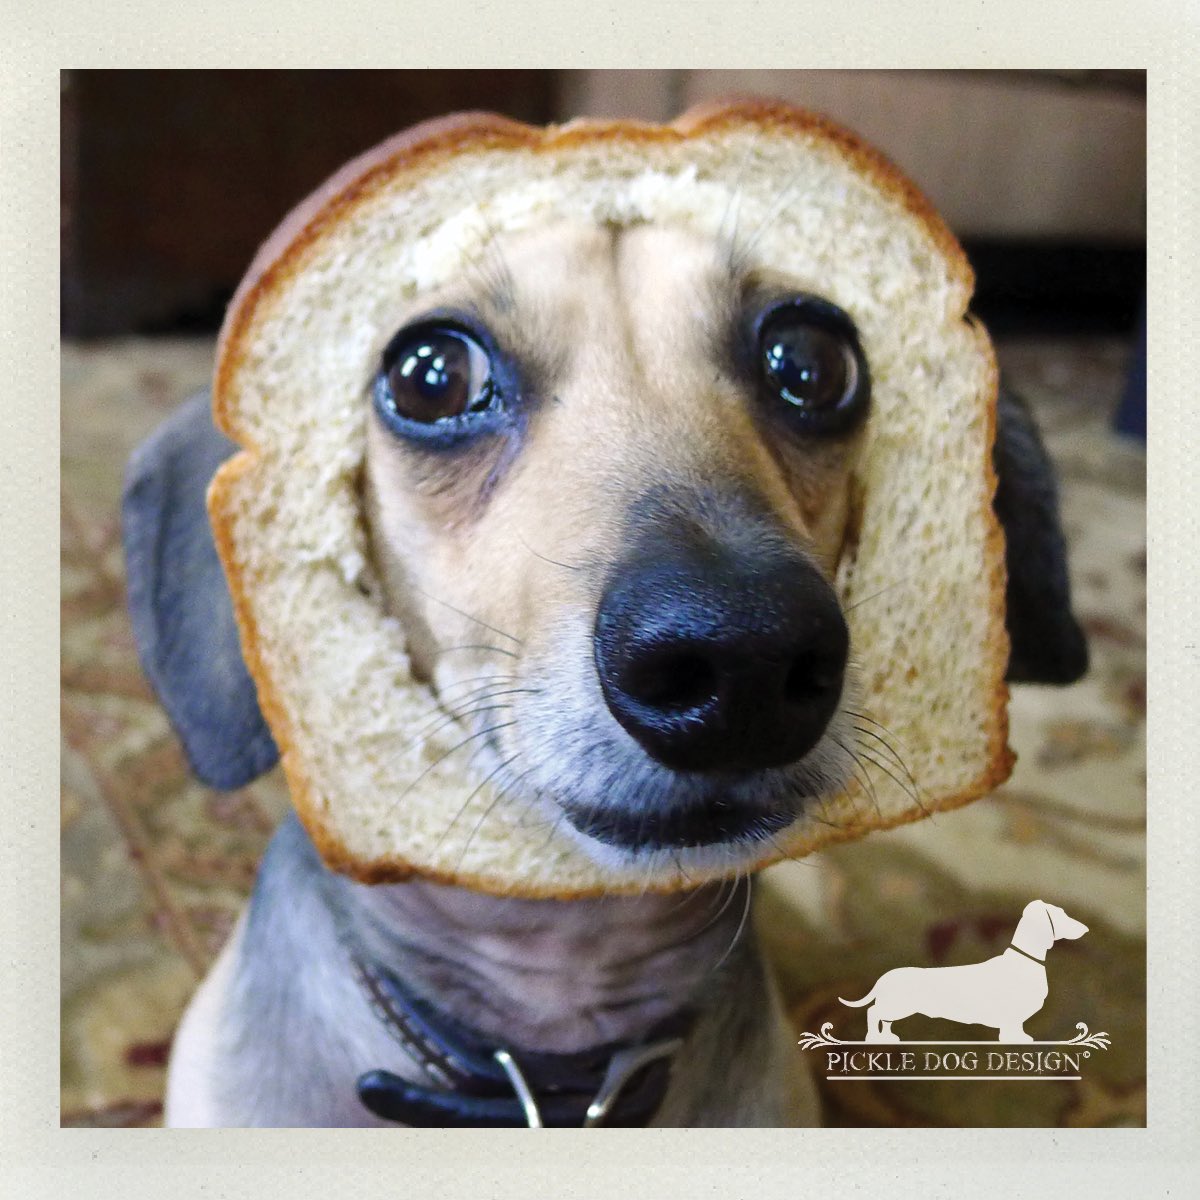 A lot of people are about the turkey, but we’re all about the carbs... Happy Thanksgiving! 🦃

#purebred #purebread #breadface #minidoxie #dachshund #doxie #happythanksgiving #dogsofminneapolis #doglife #dogoftheday #dogbread #breaddog